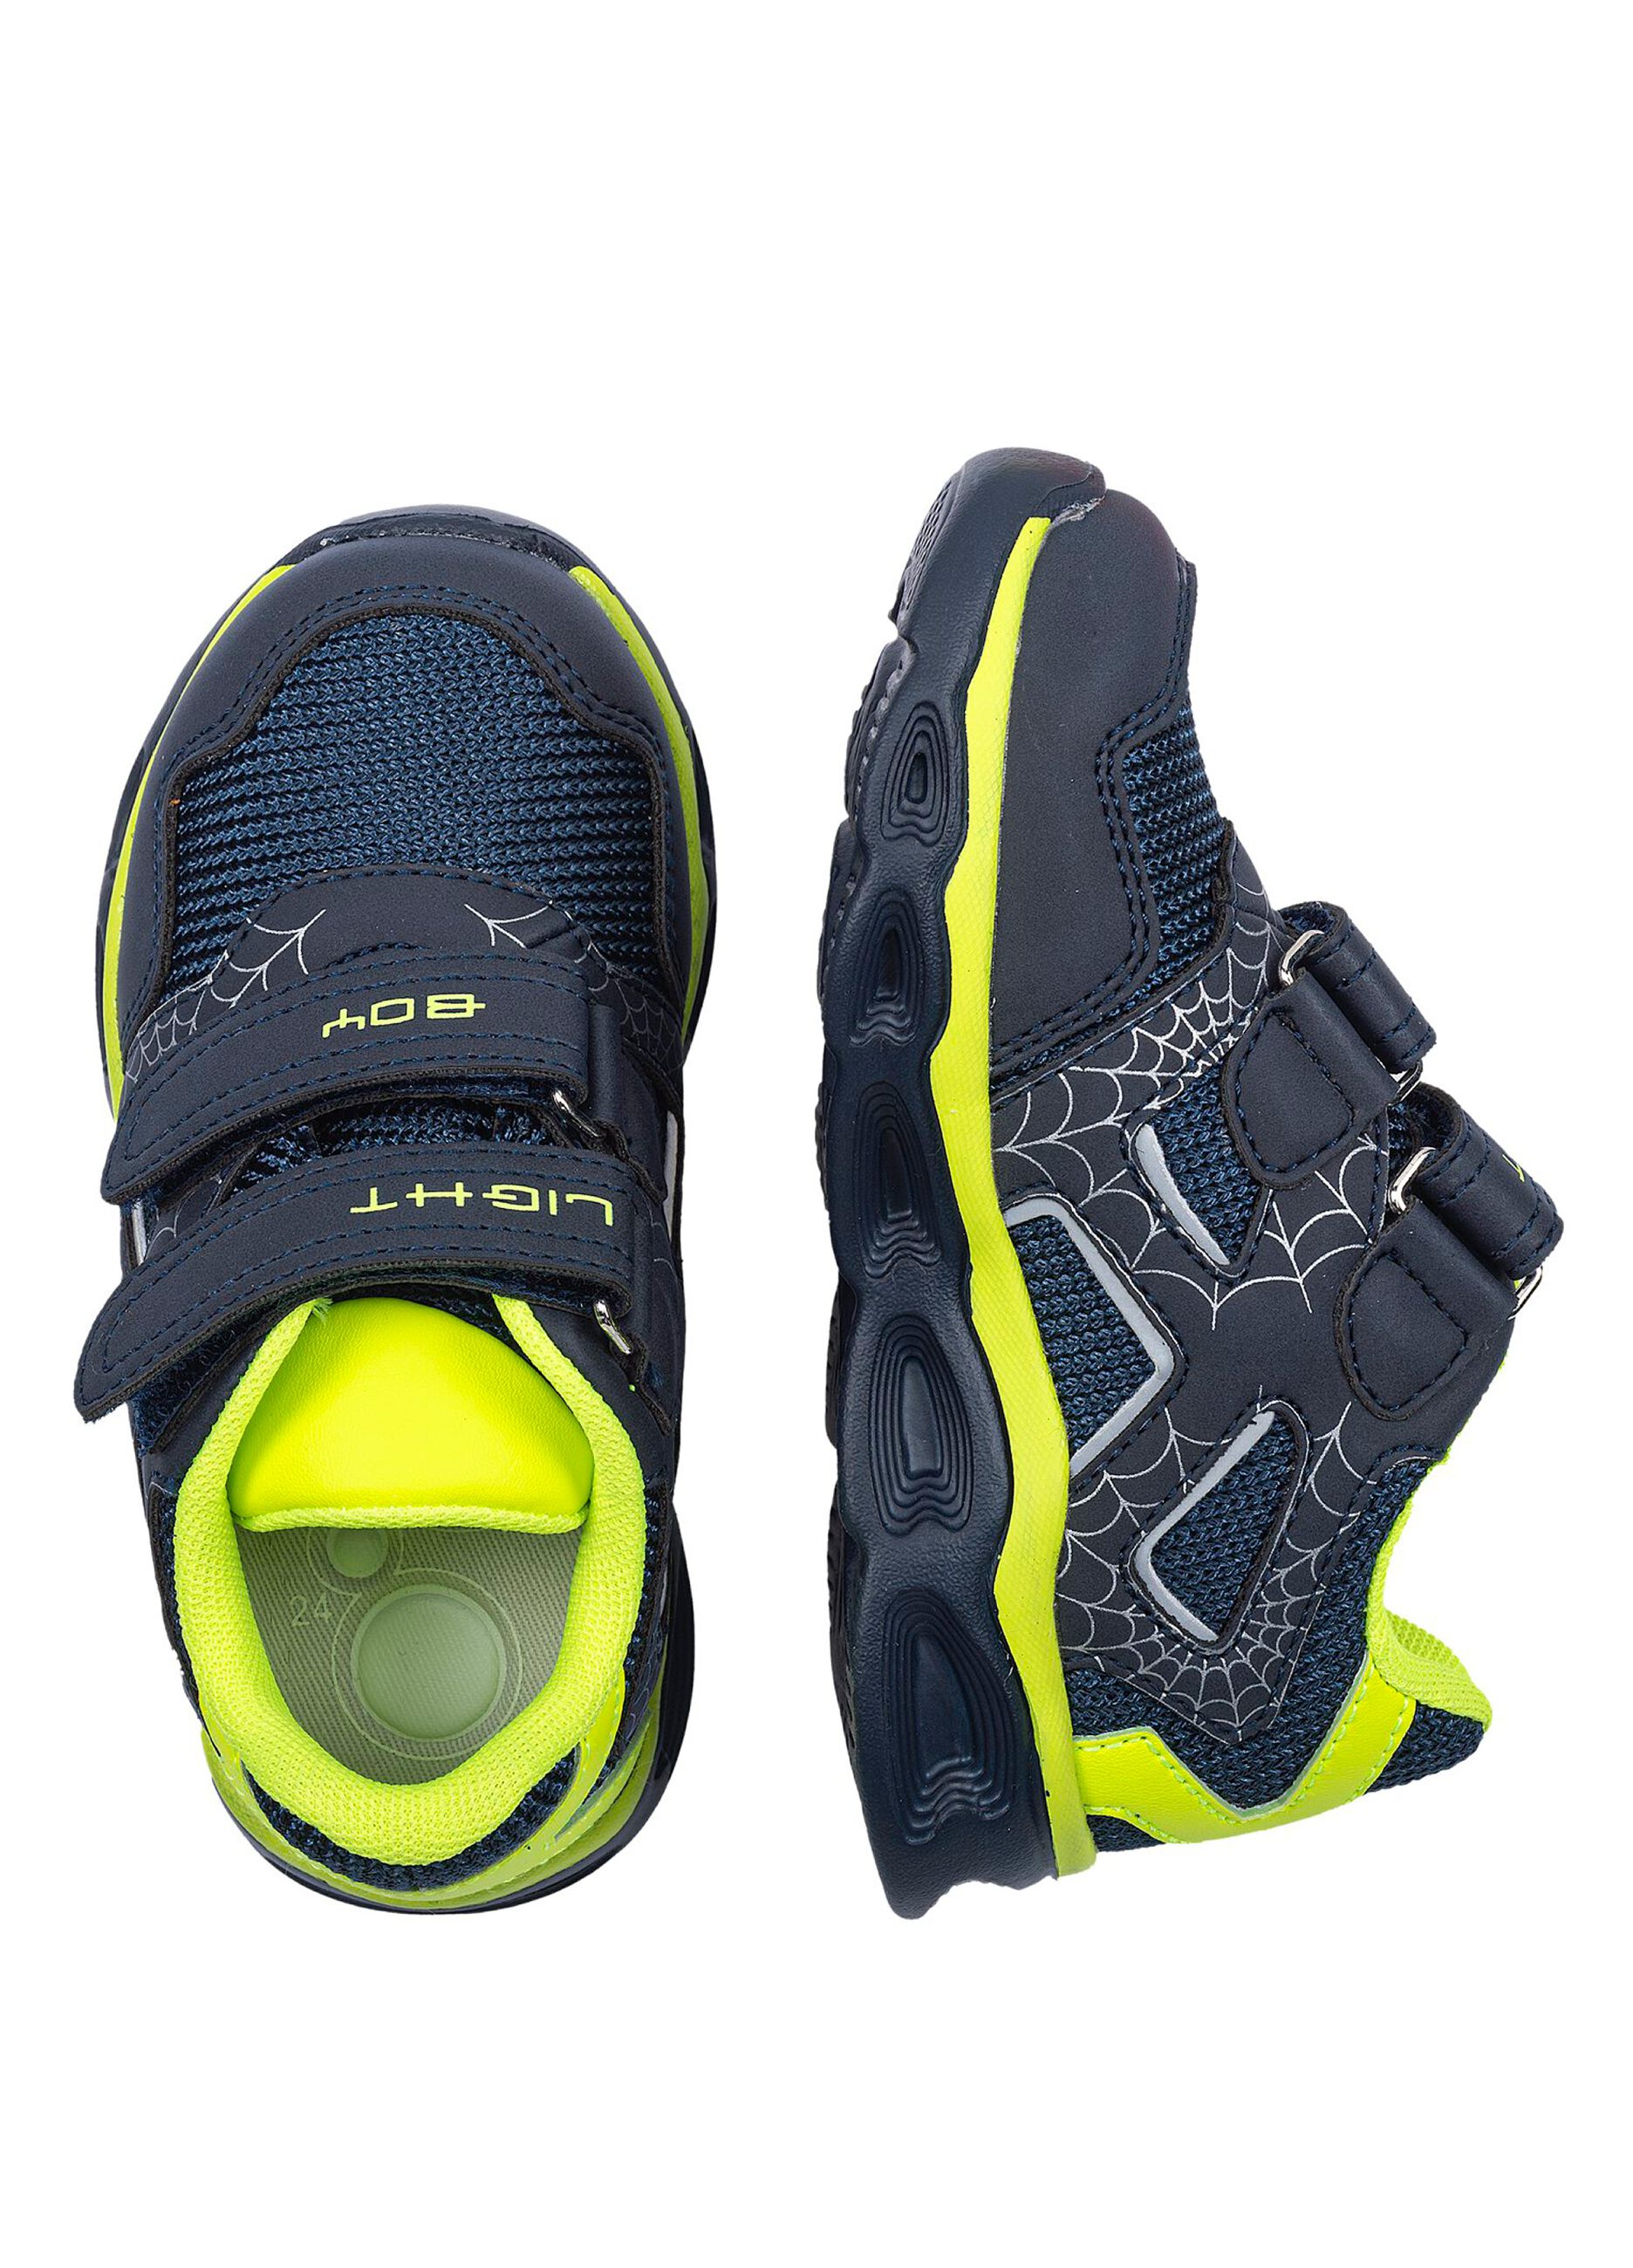 Chicco boys’ sneakers